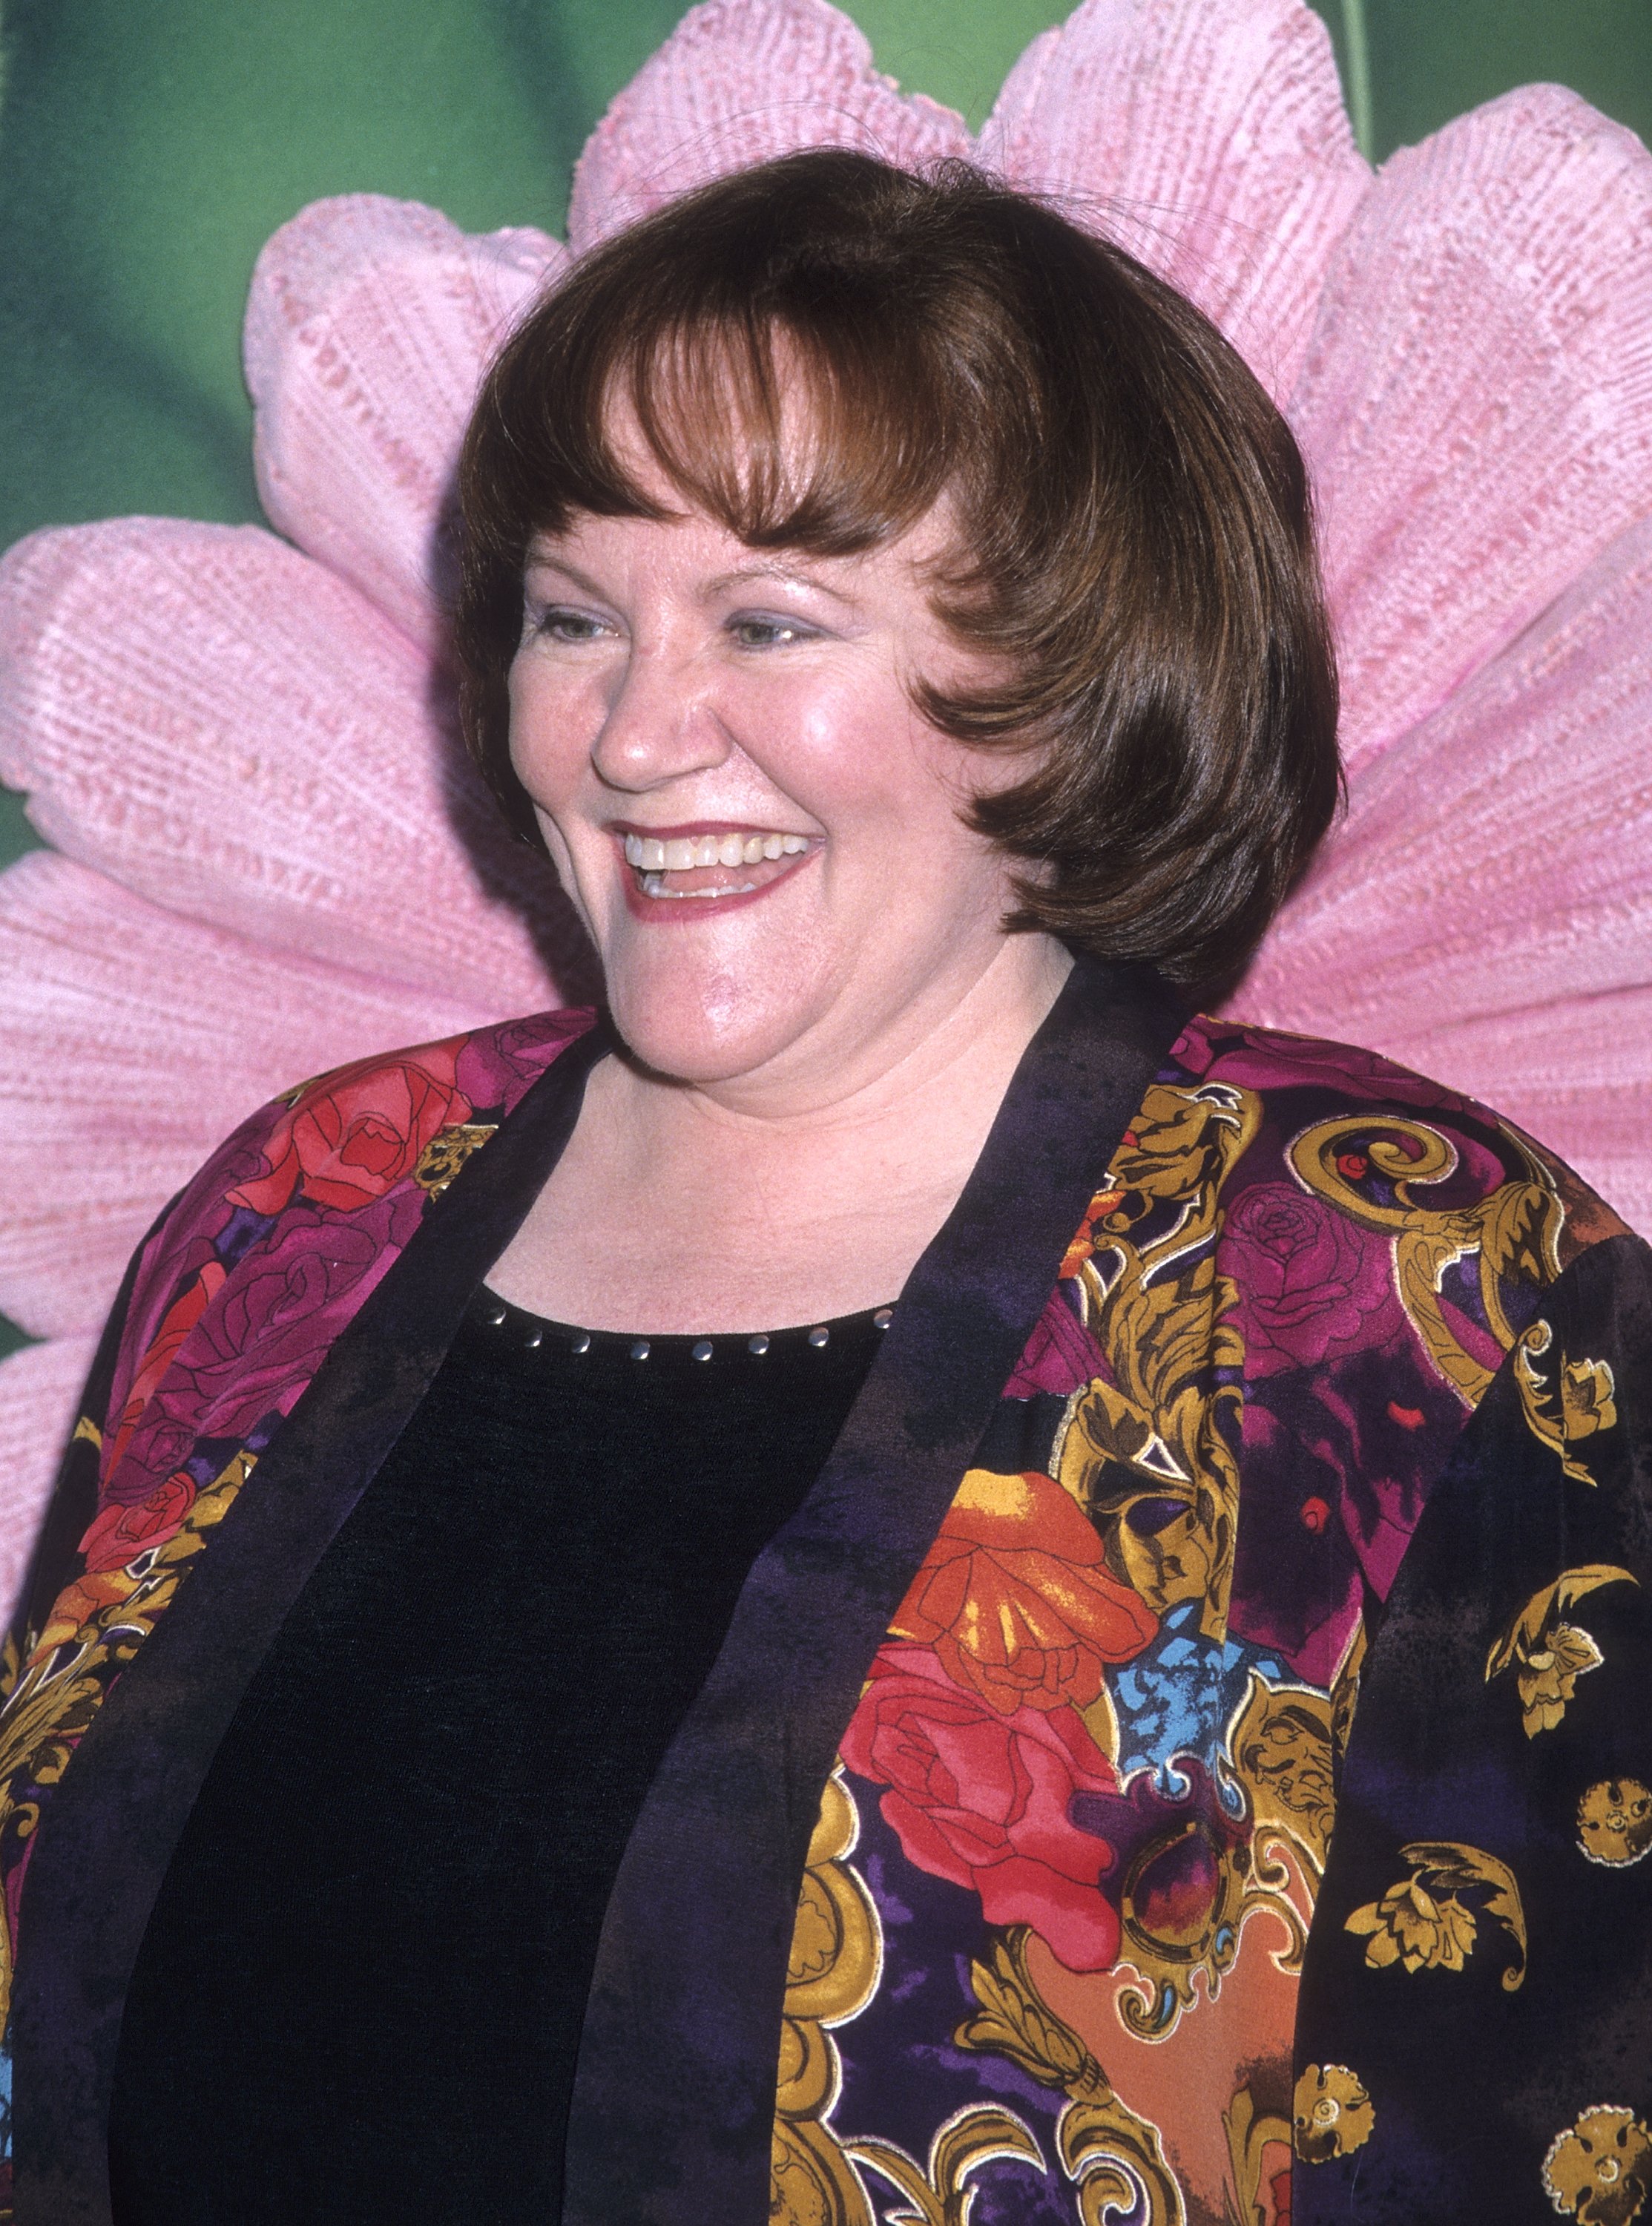 Actress Edie McClurg attends "A Bug's Life" Hollywood Premiere on November 14, 1998 at the El Capitan Theatre in Hollywood, California. | Source: Getty Images